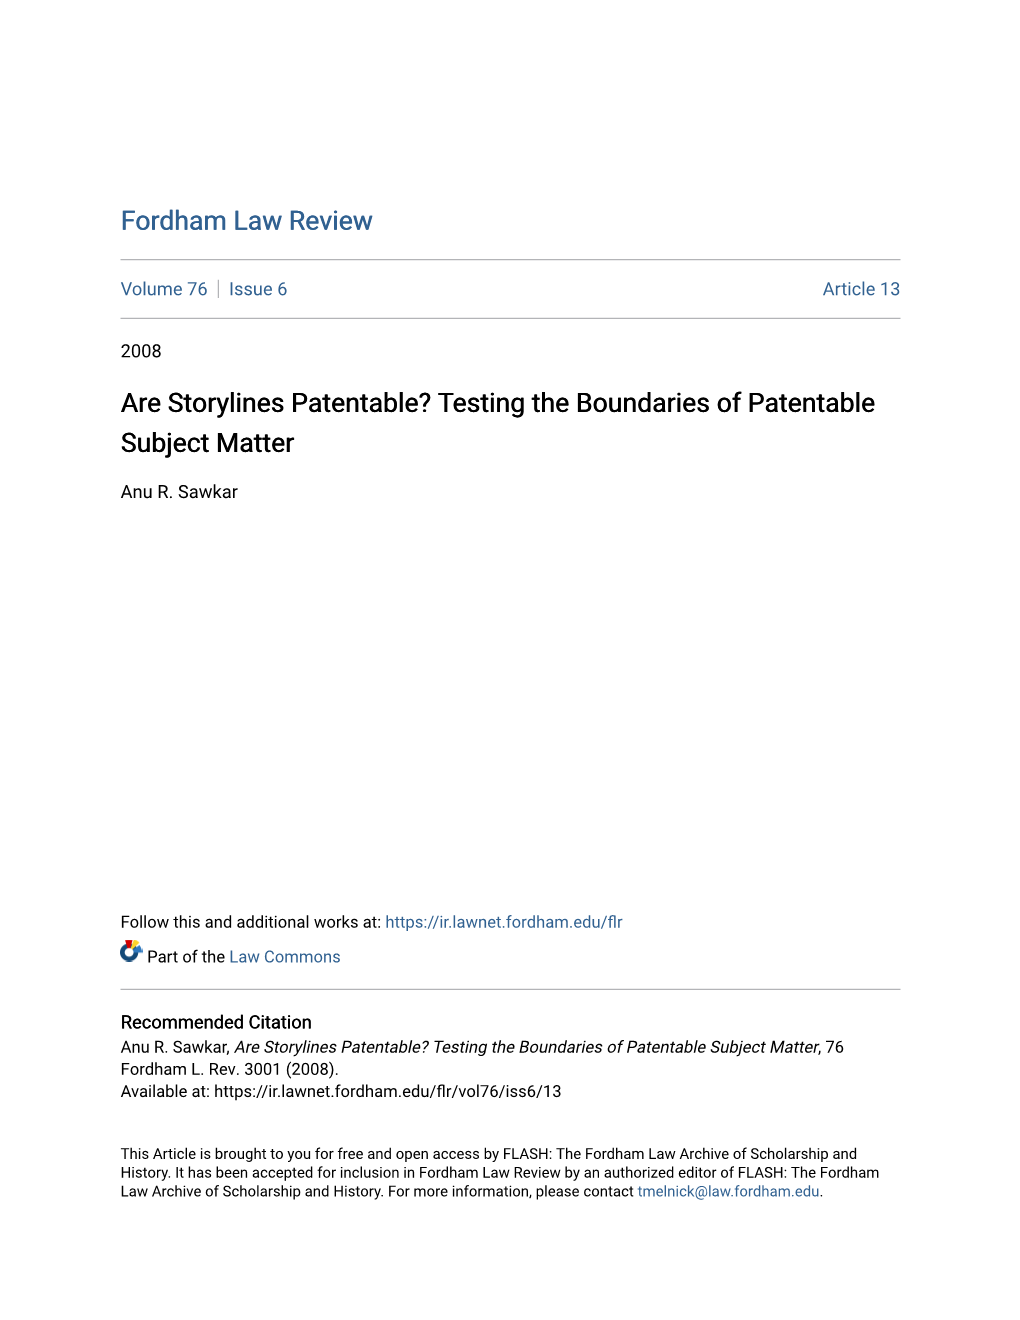 Are Storylines Patentable? Testing the Boundaries of Patentable Subject Matter